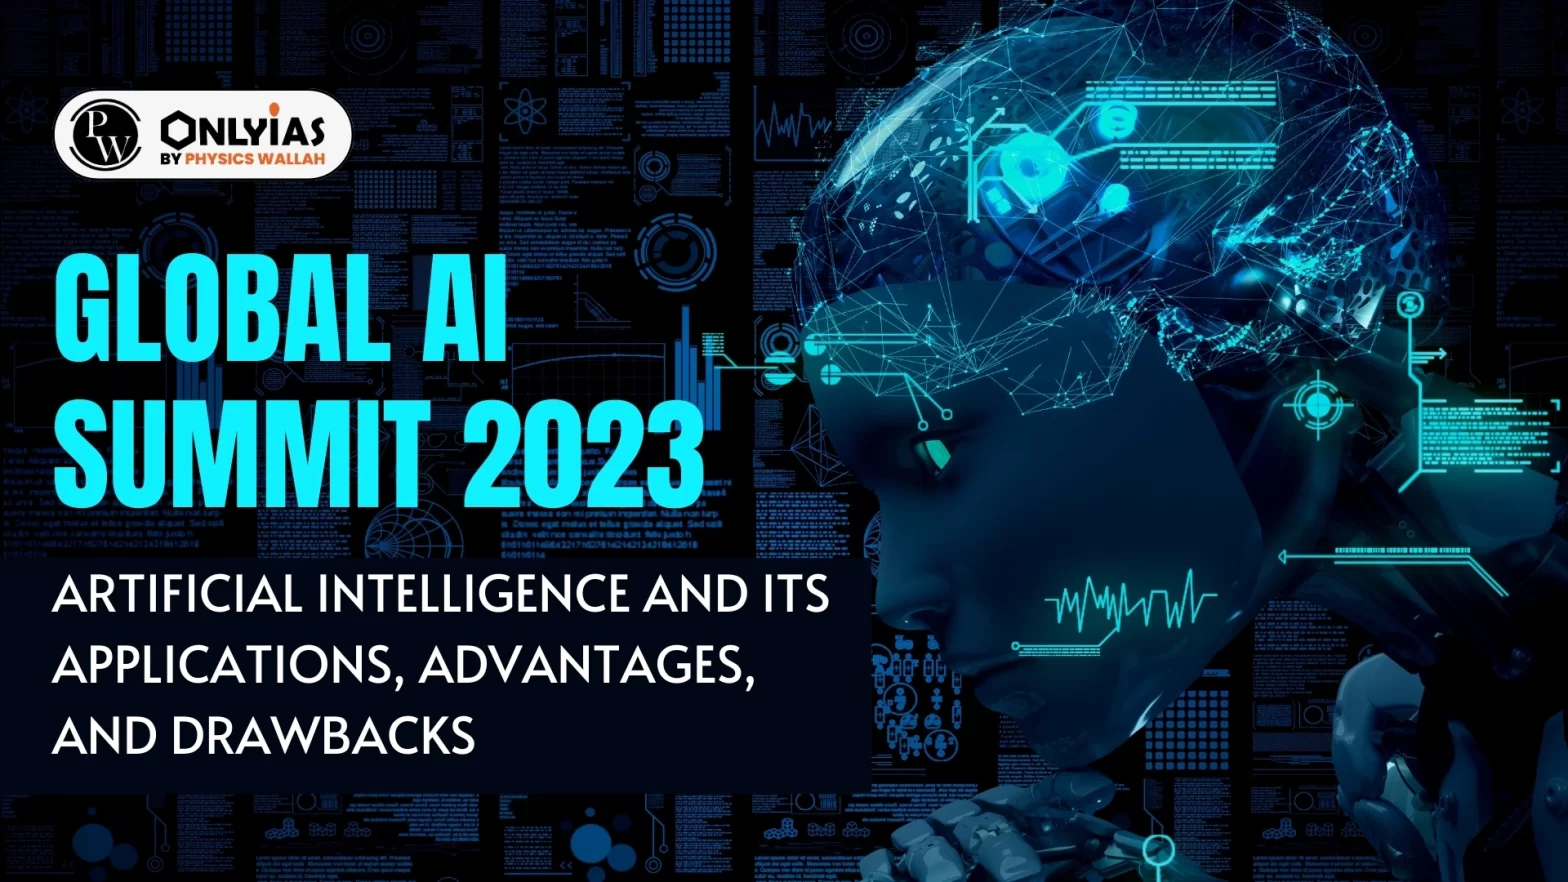 Global AI Summit 2023: Artificial Intelligence and Its Applications, Advantages, and Drawbacks